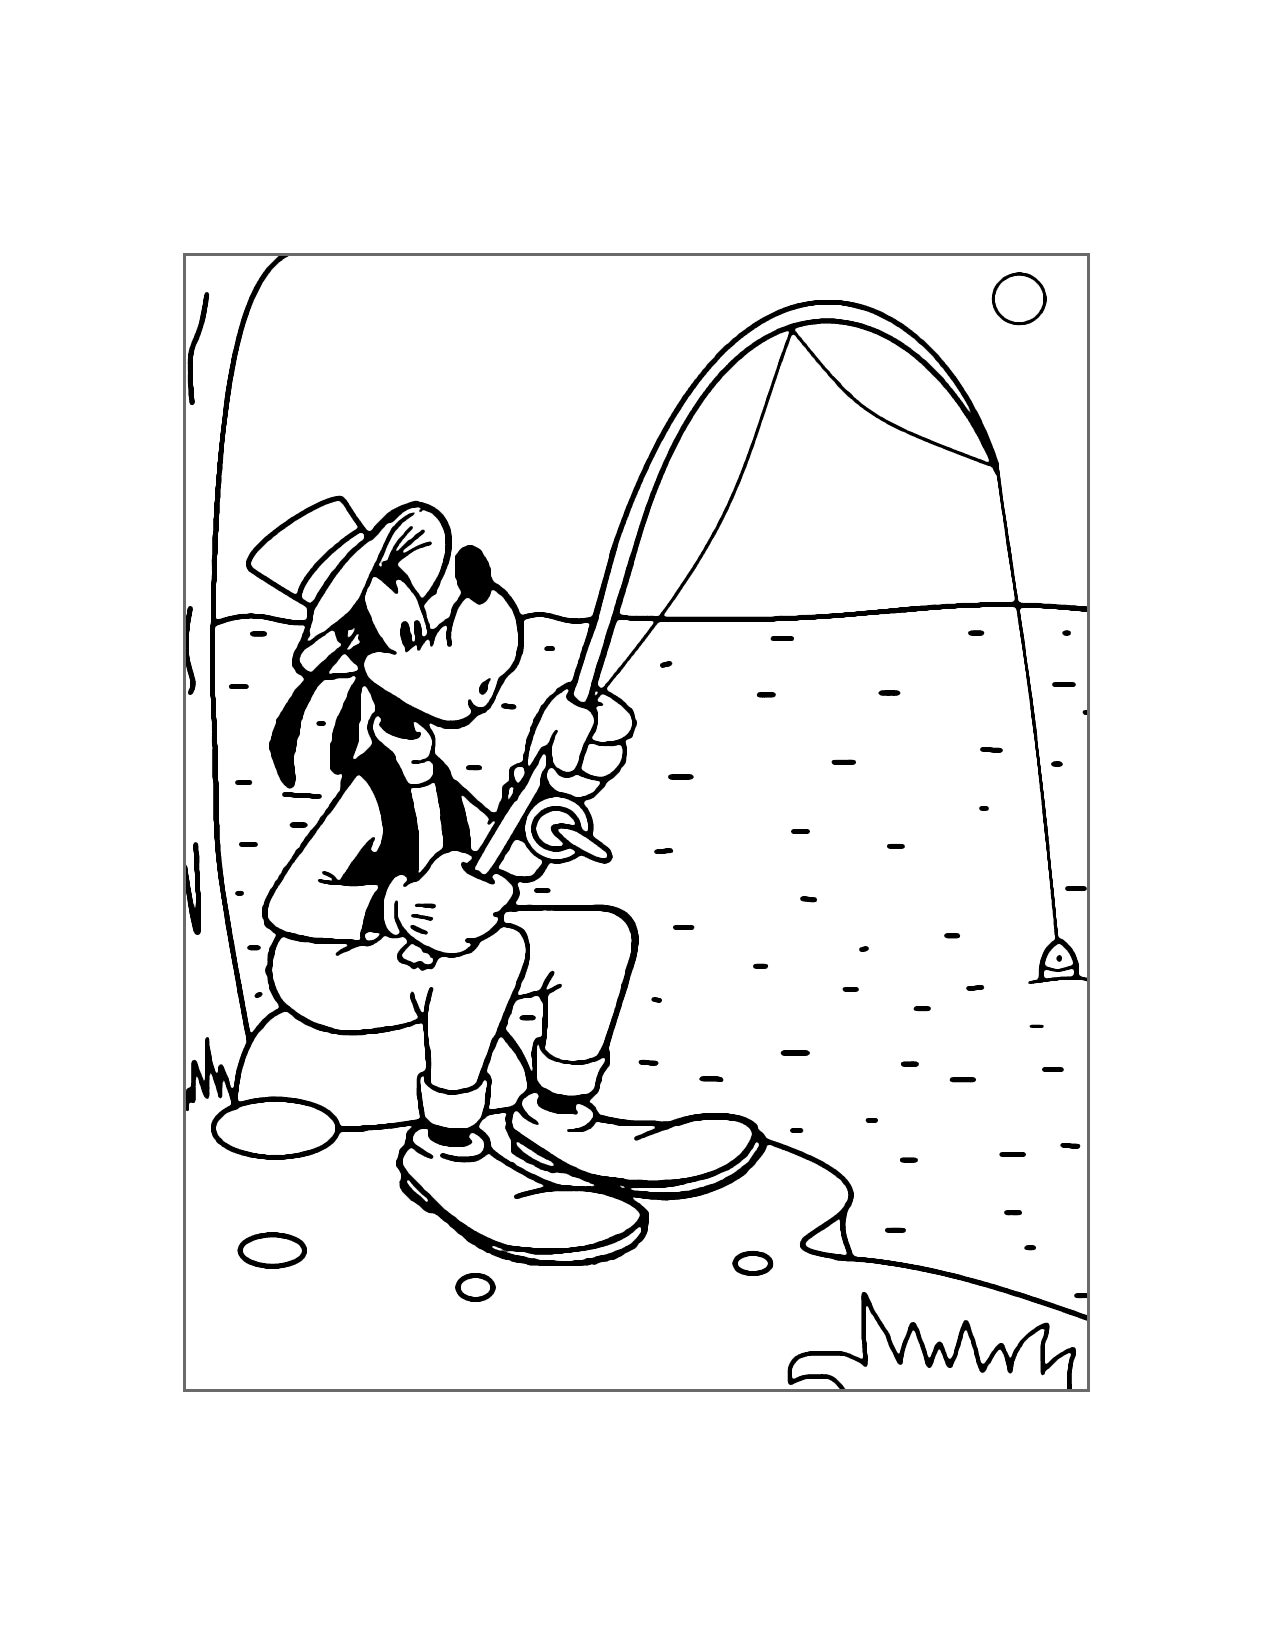 Goofy Has Gone Fishing Coloring Page